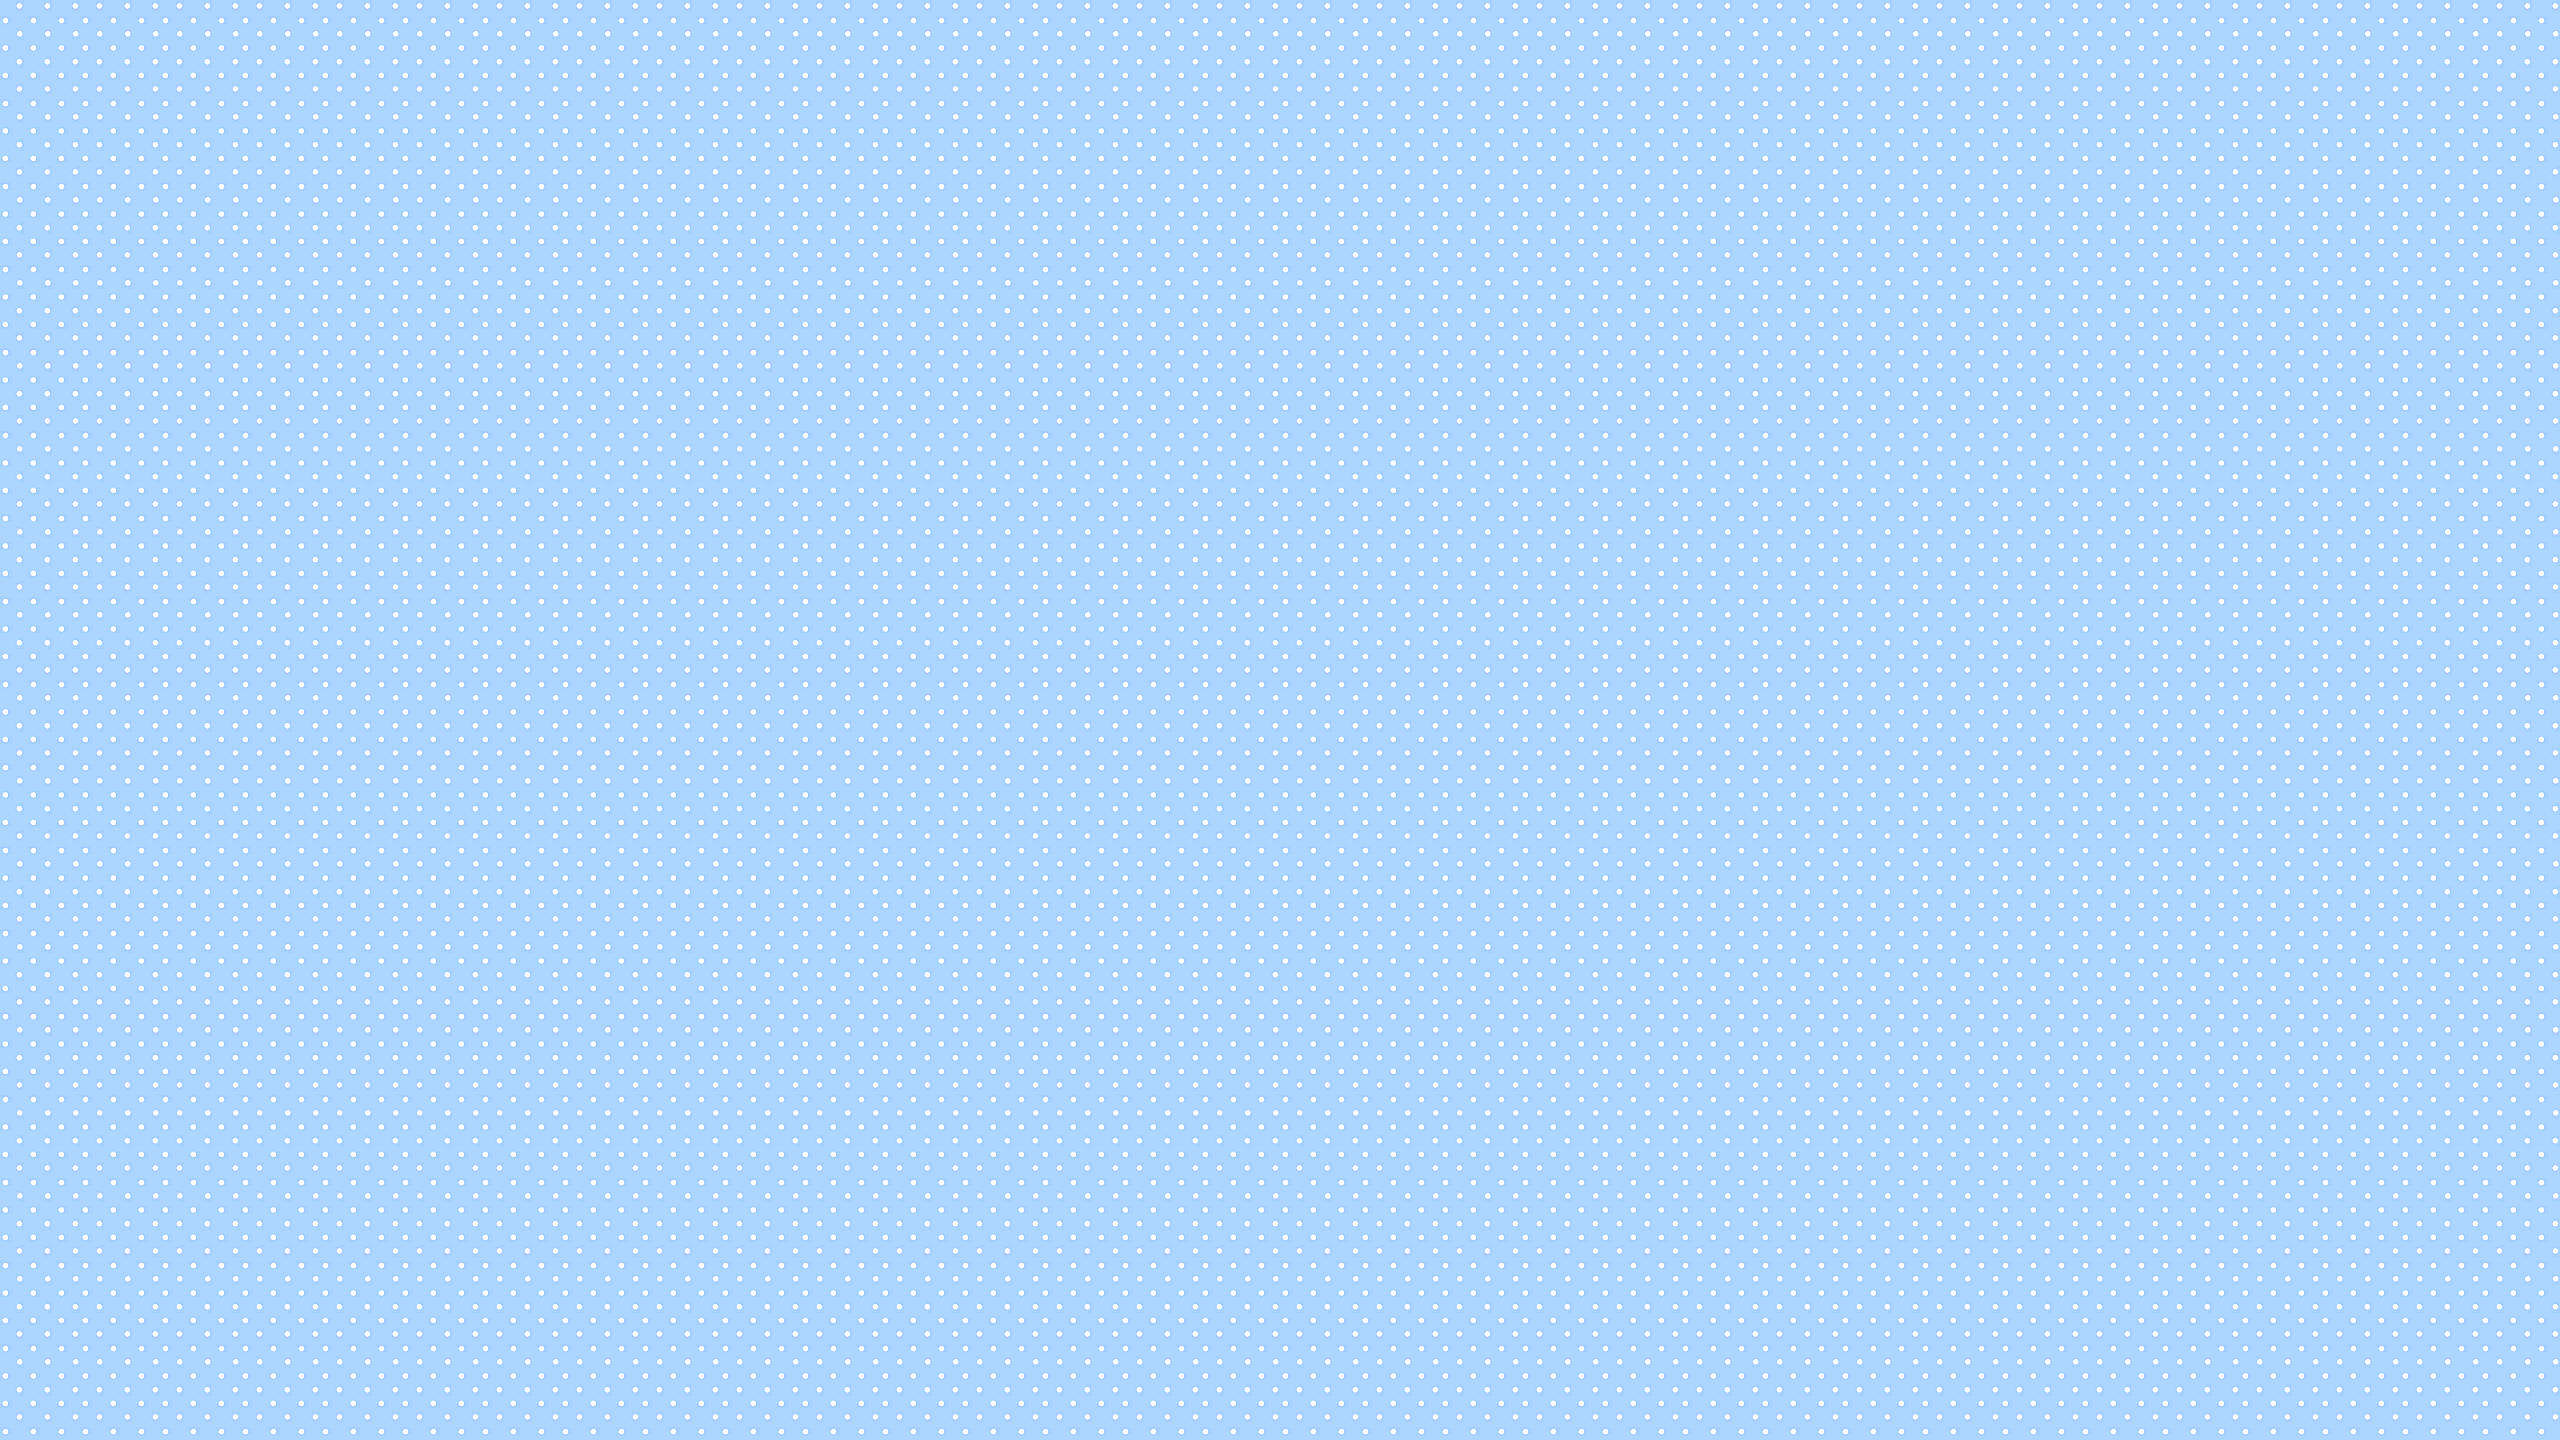 25+ Pastel Blue Wallpapers: HD, 4K, 5K for PC and Mobile | Download free  images for iPhone, Android